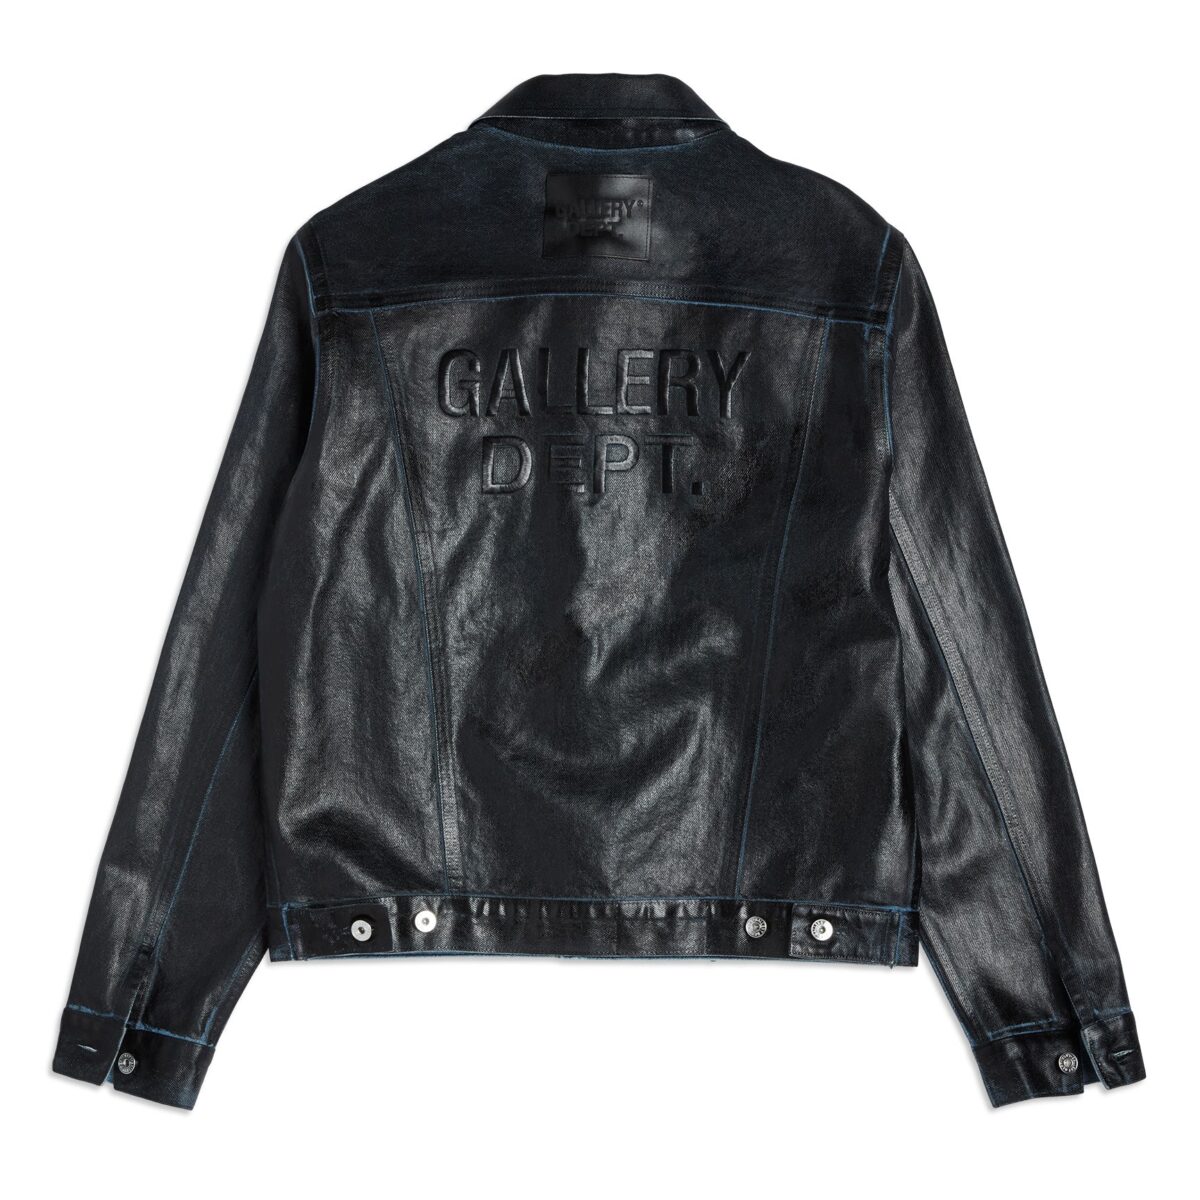 Gallery Dept Analog Andy Jacket